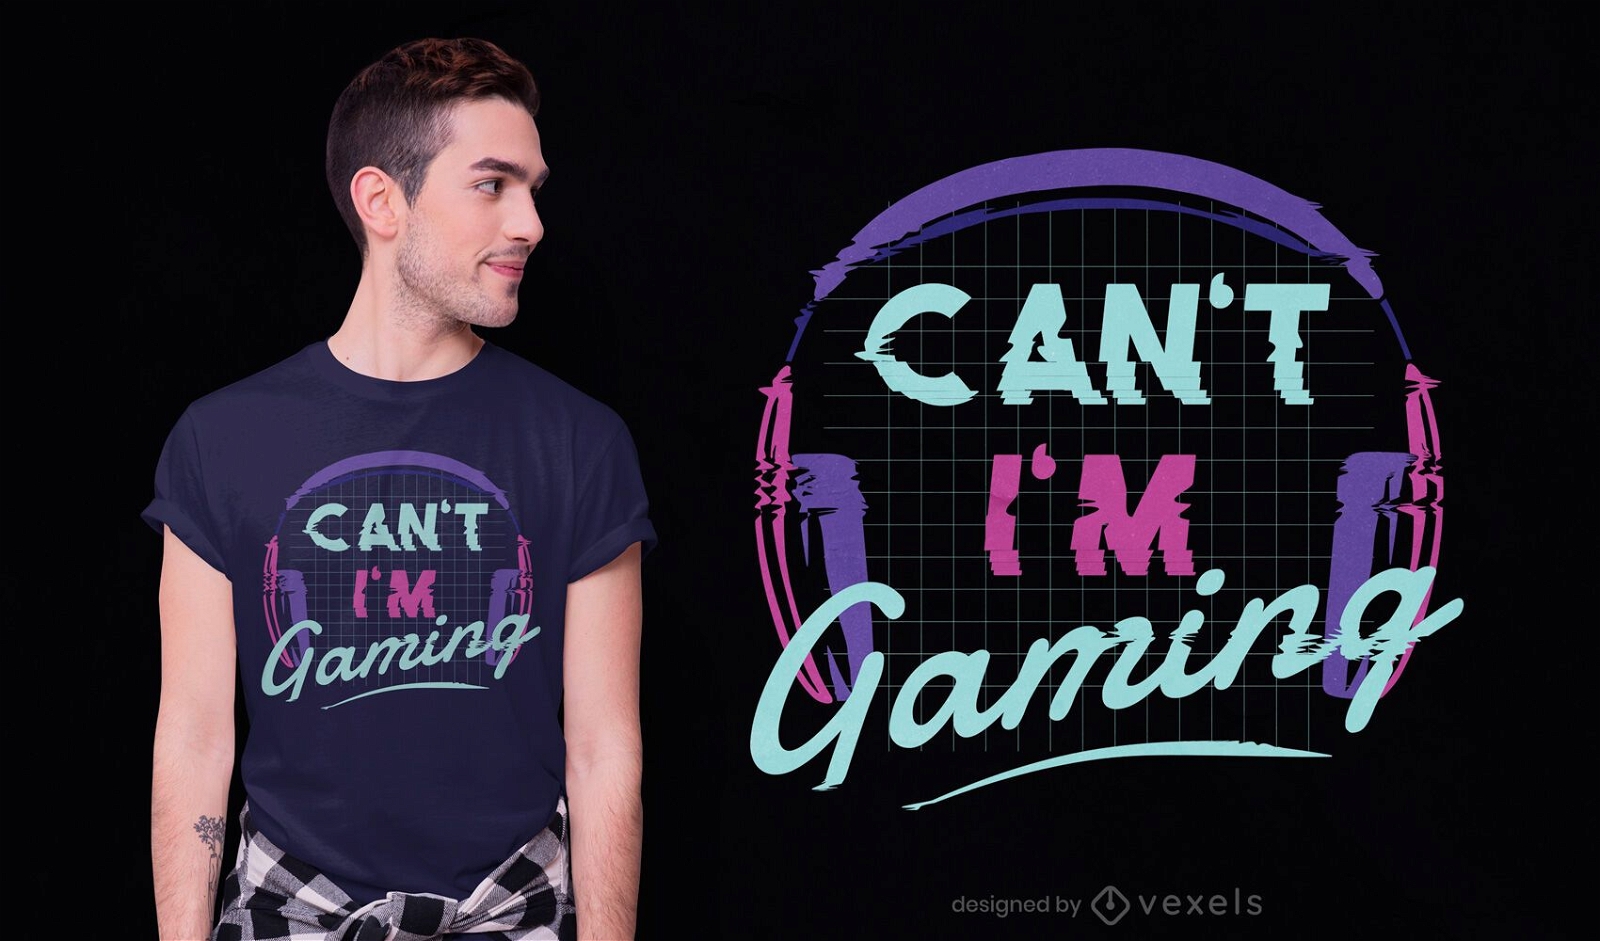 Can't i'm gaming t-shirt design